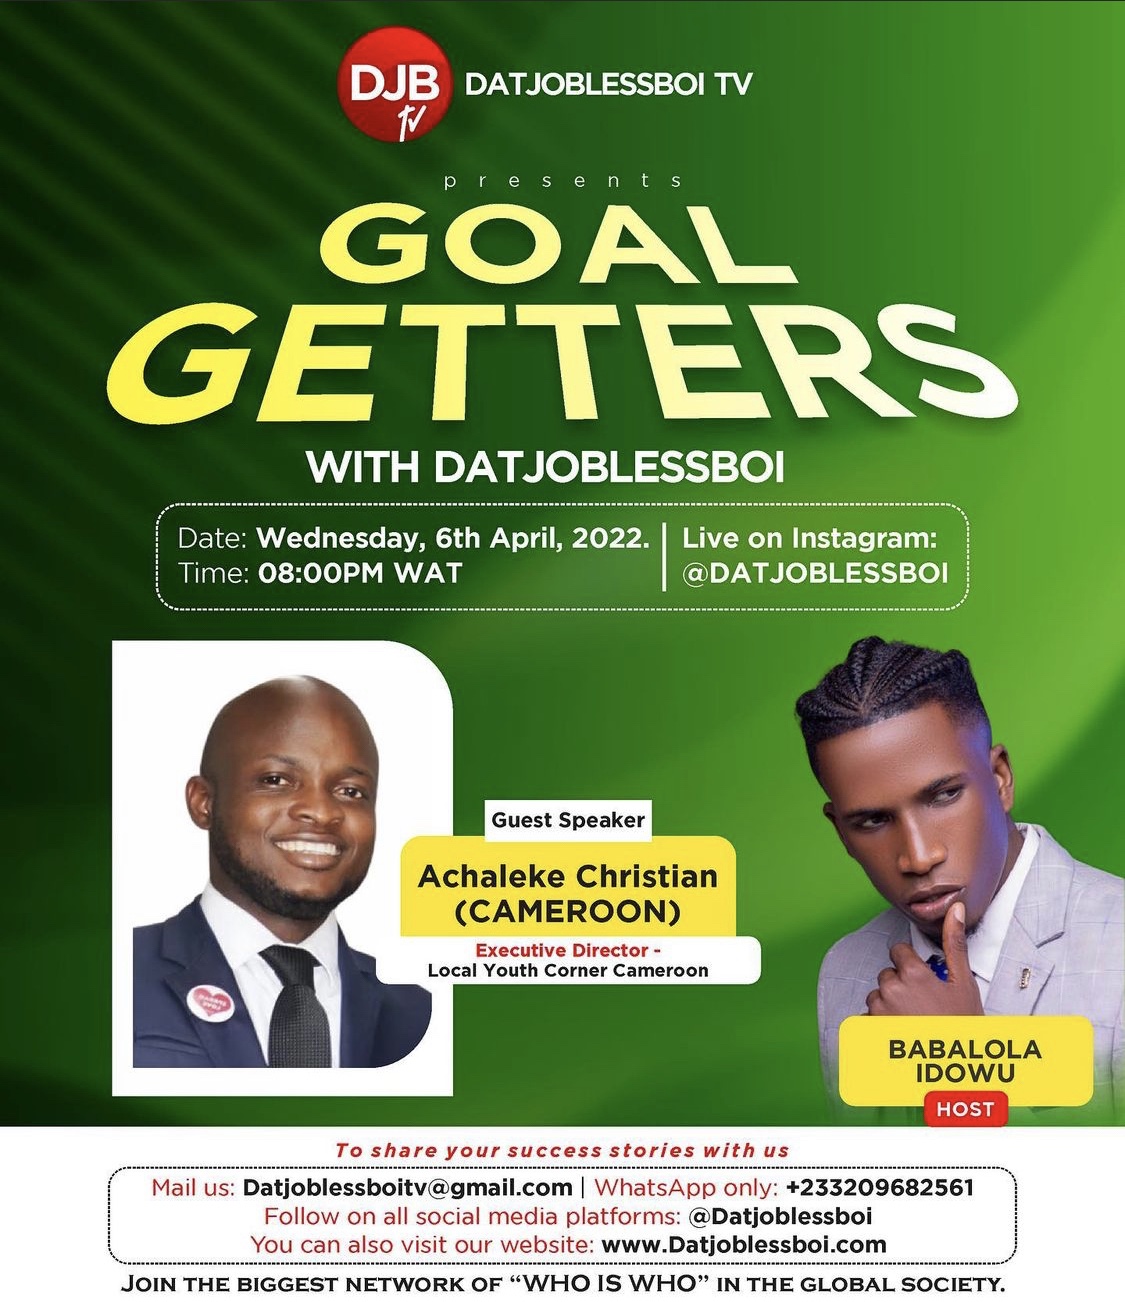 GOAL GETTERS WITH DATJOBLESSBOI TO FEATURE ACHALEKE CHRISTIAN